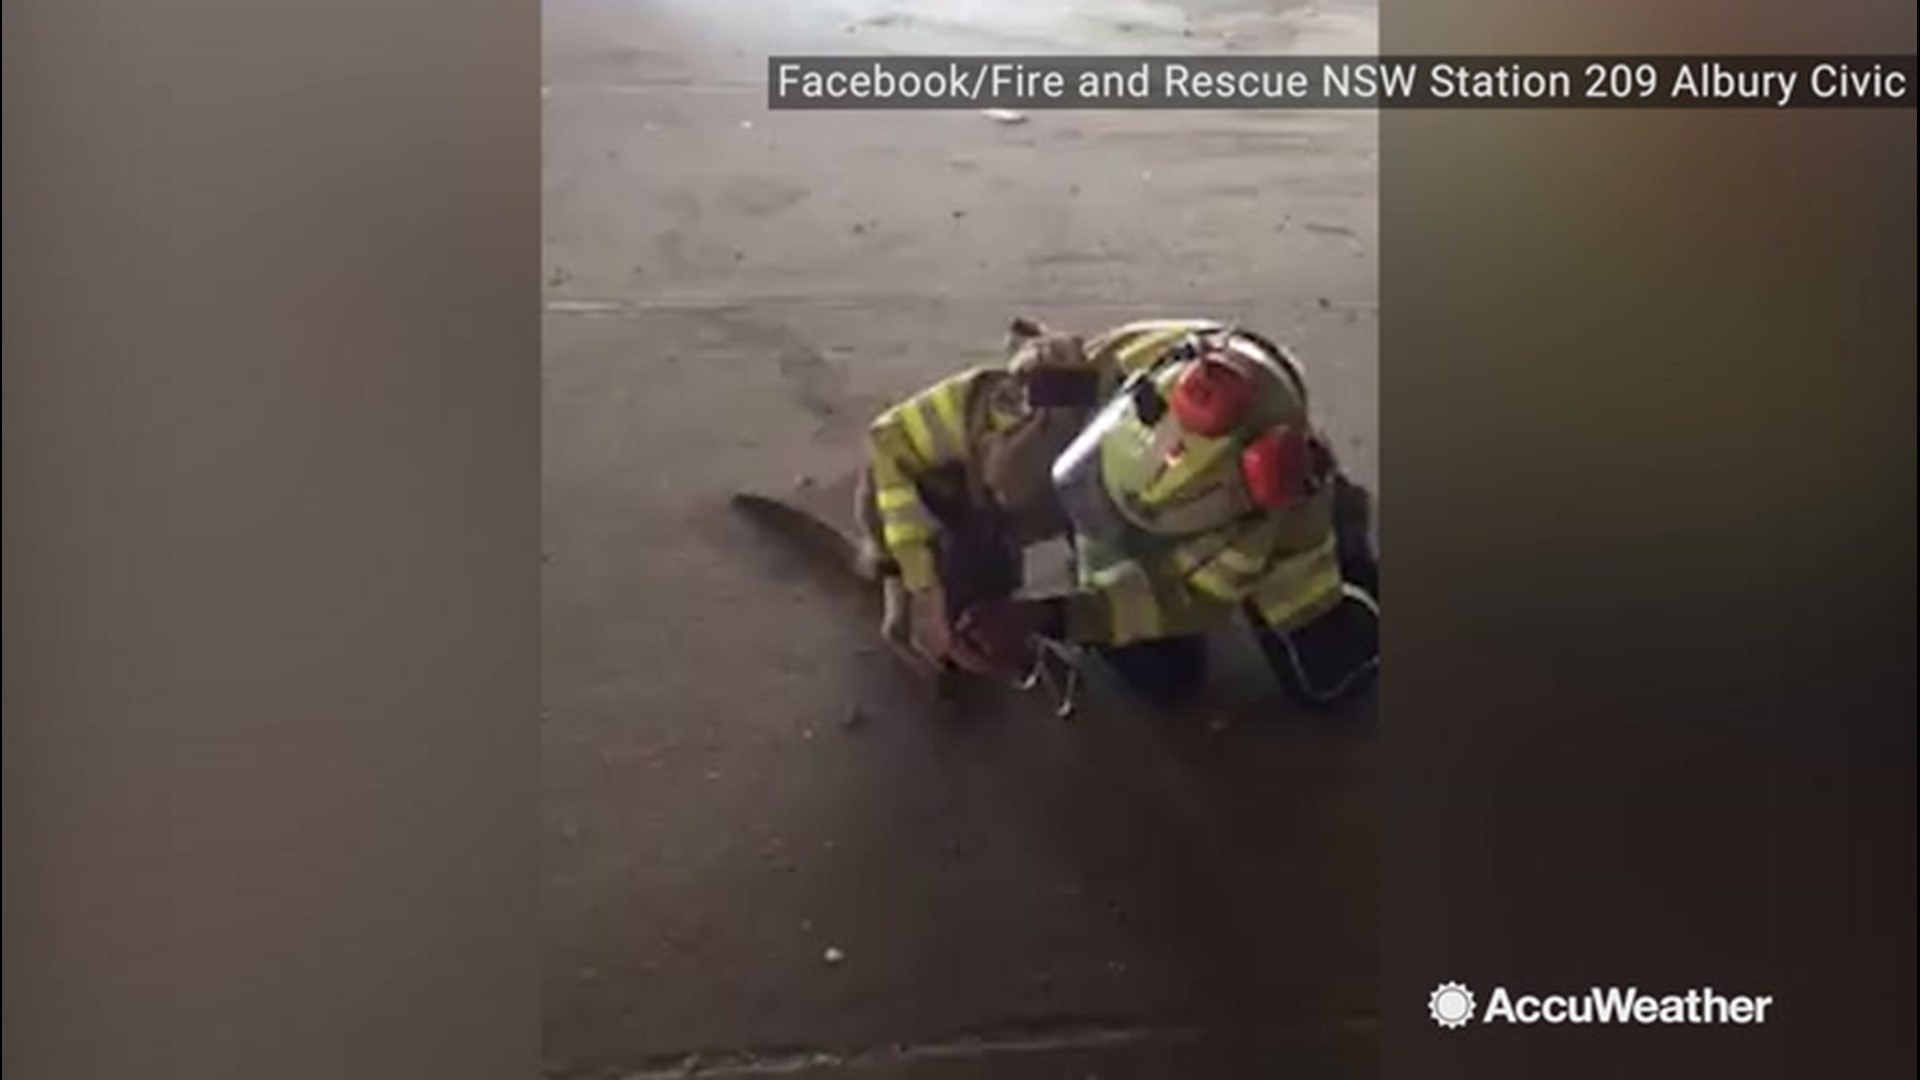 Firefighter Shaye Hatty was battling a wildfire in Australia, on Nov. 9, when she found a struggling kangaroo. She sprung into action, giving it oxygen, water and first aid.